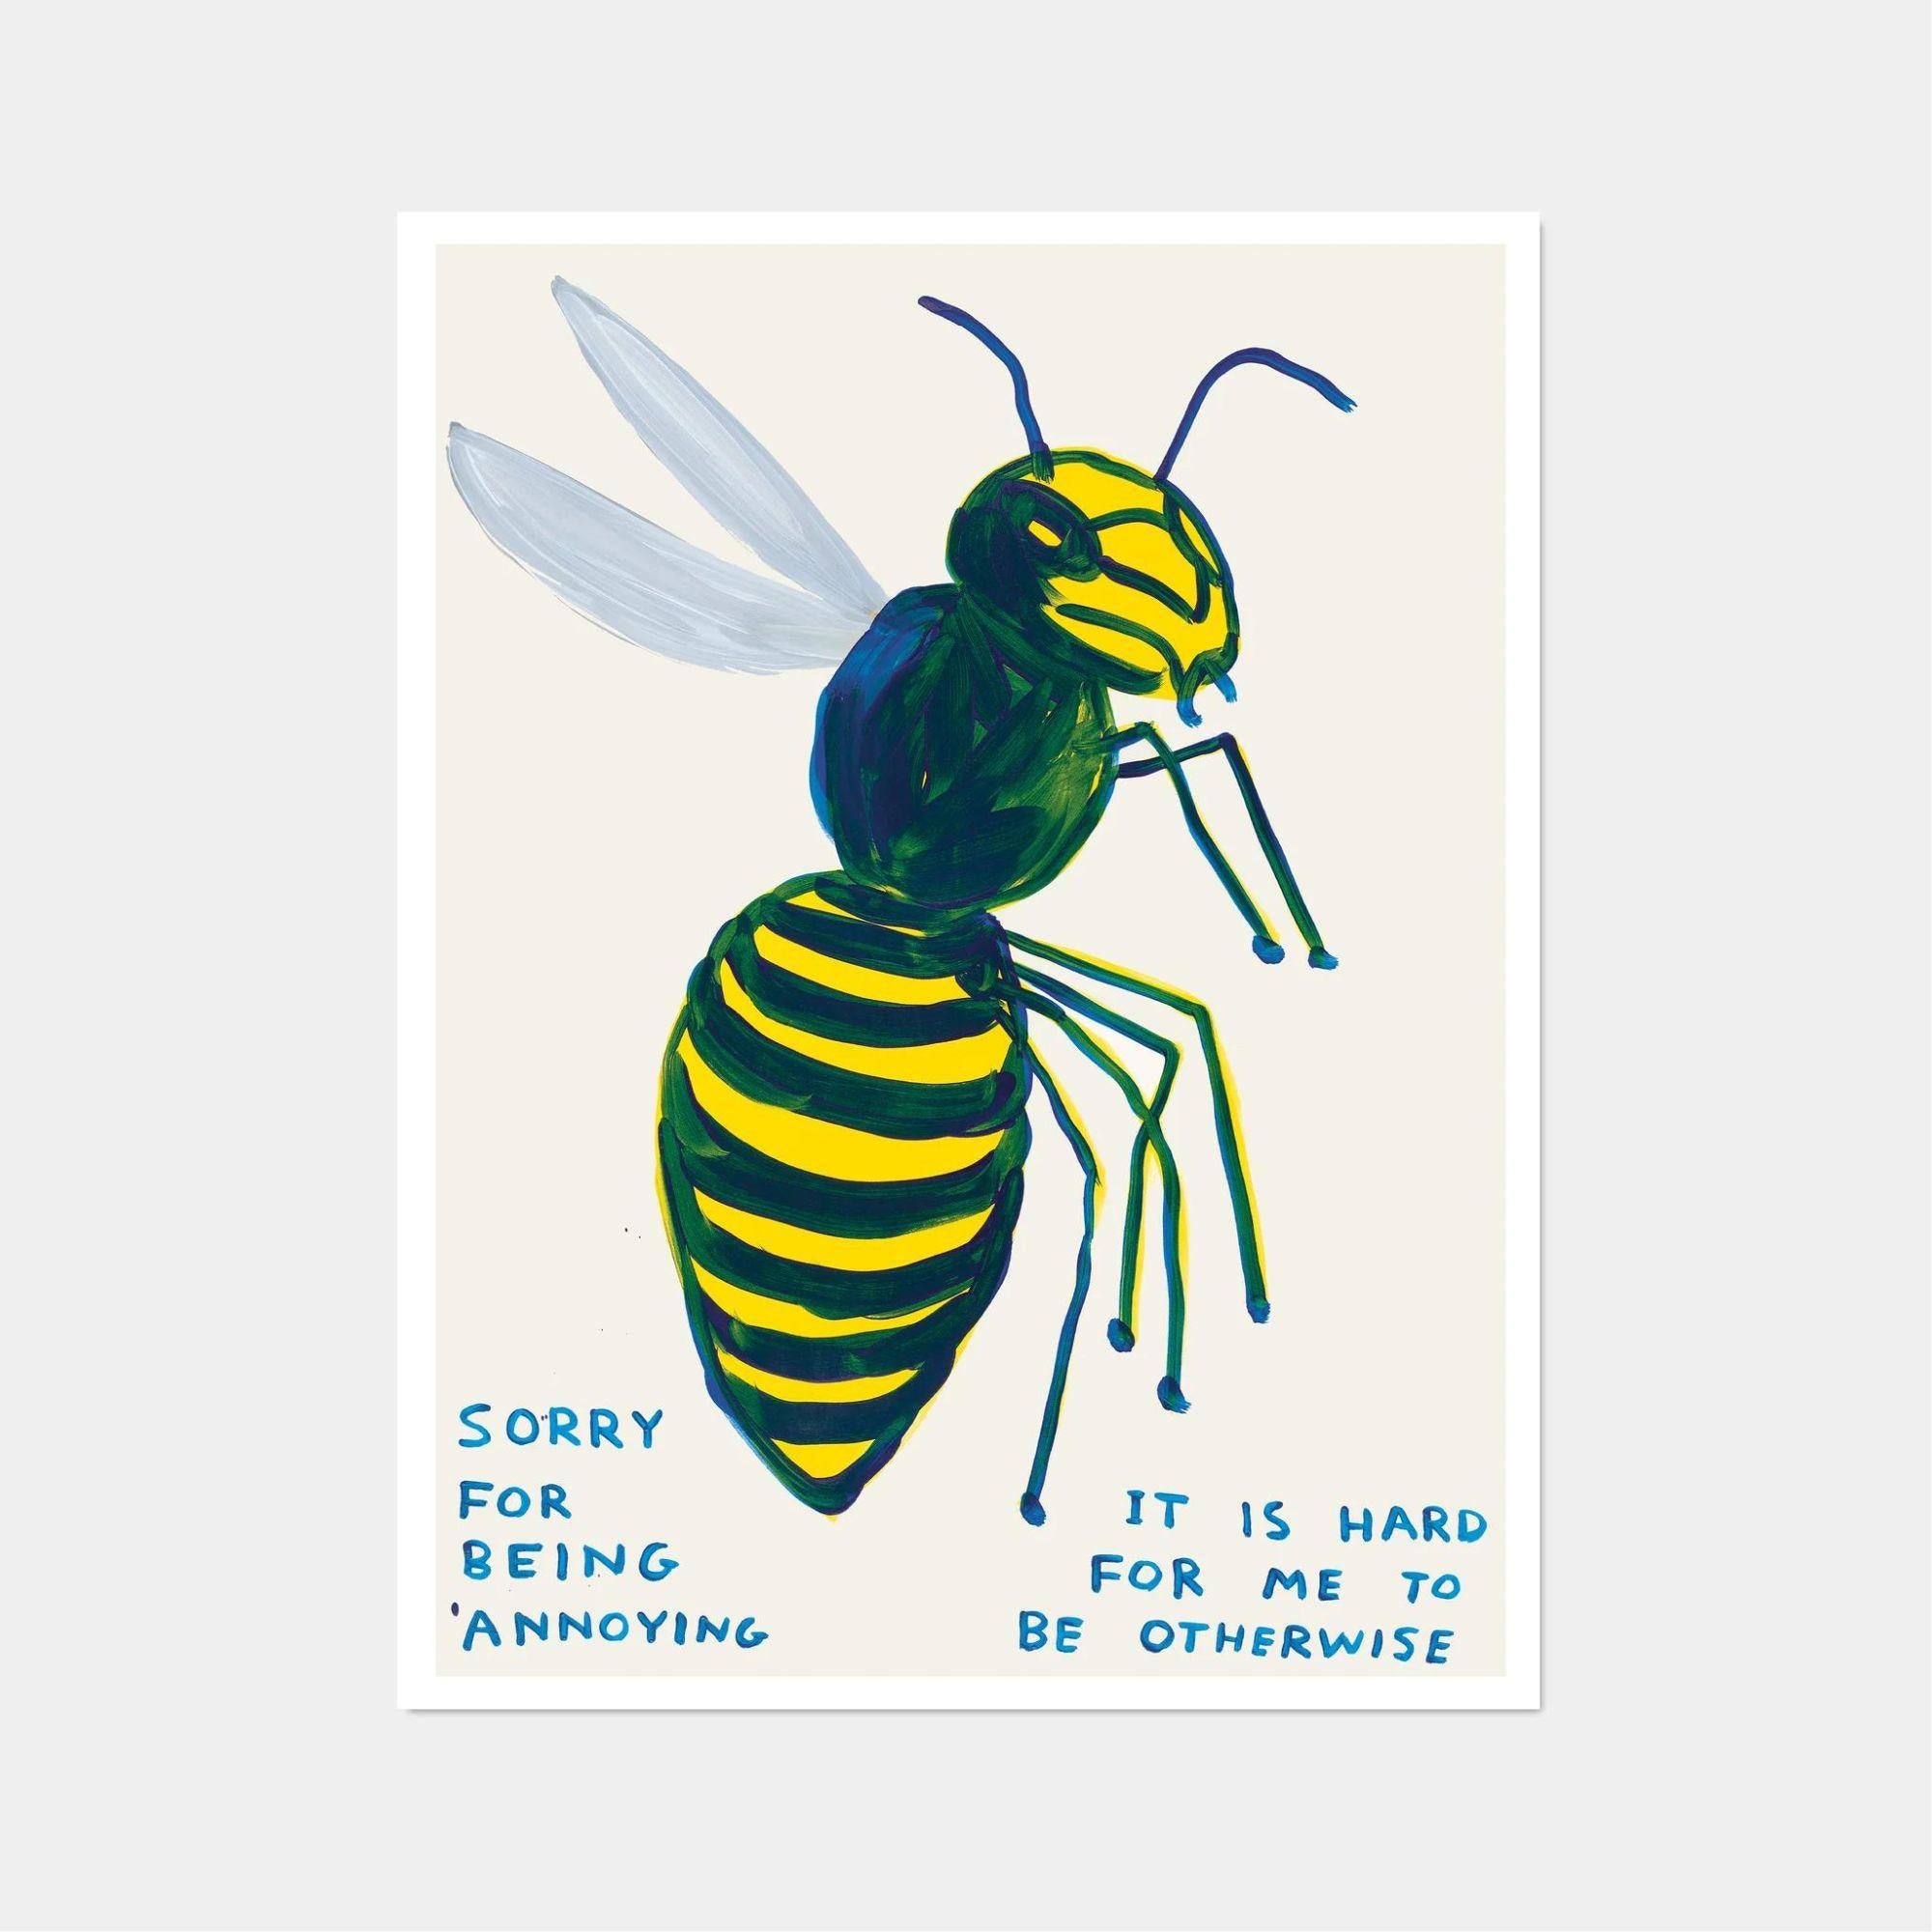 Sorry For Being Annoying - Print by David Shrigley